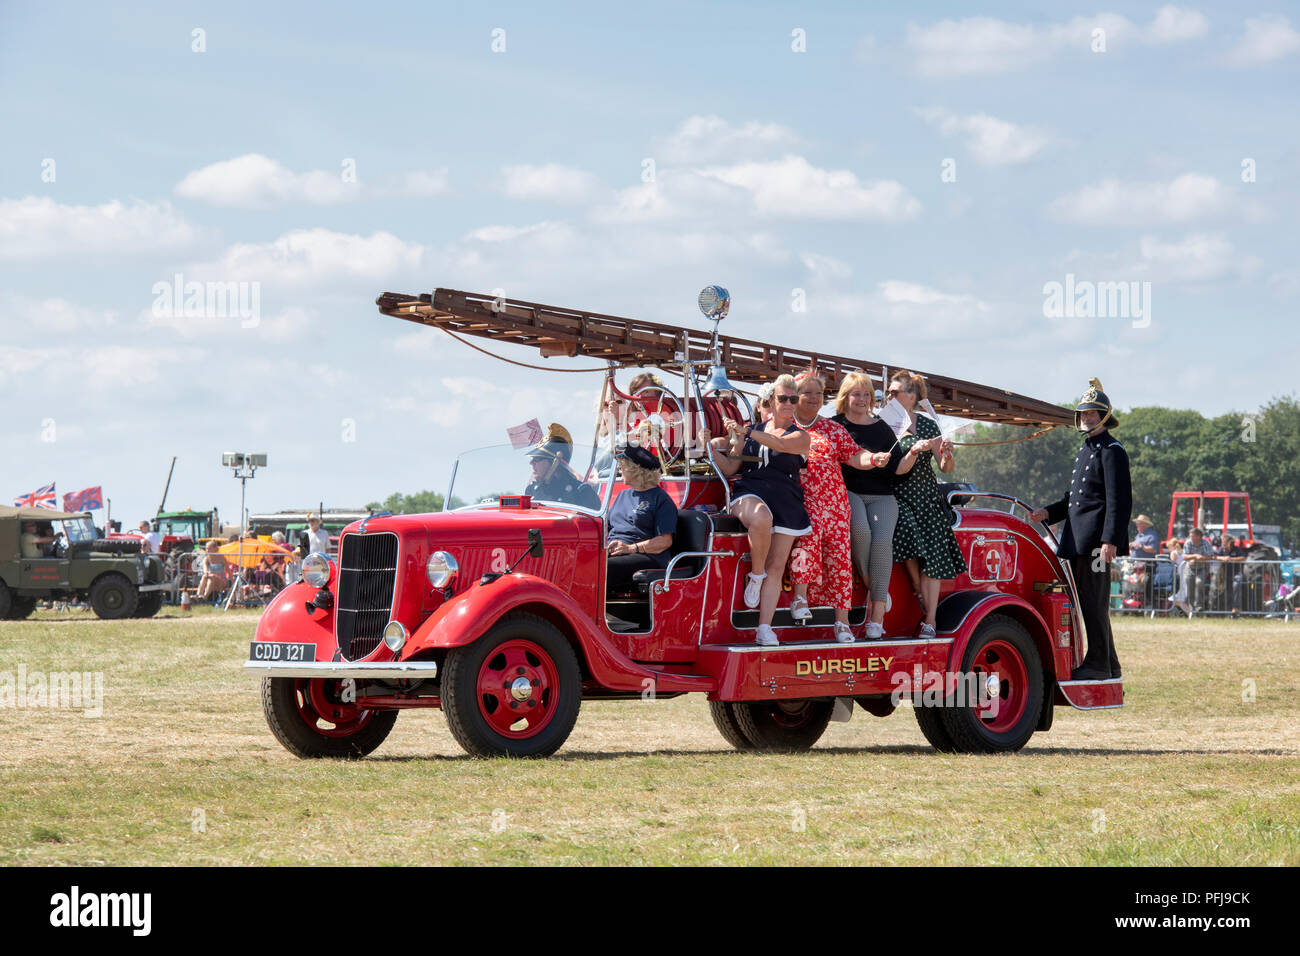 Vintage fire engine carrying a group of female dancers at a steam fair in England Stock Photo